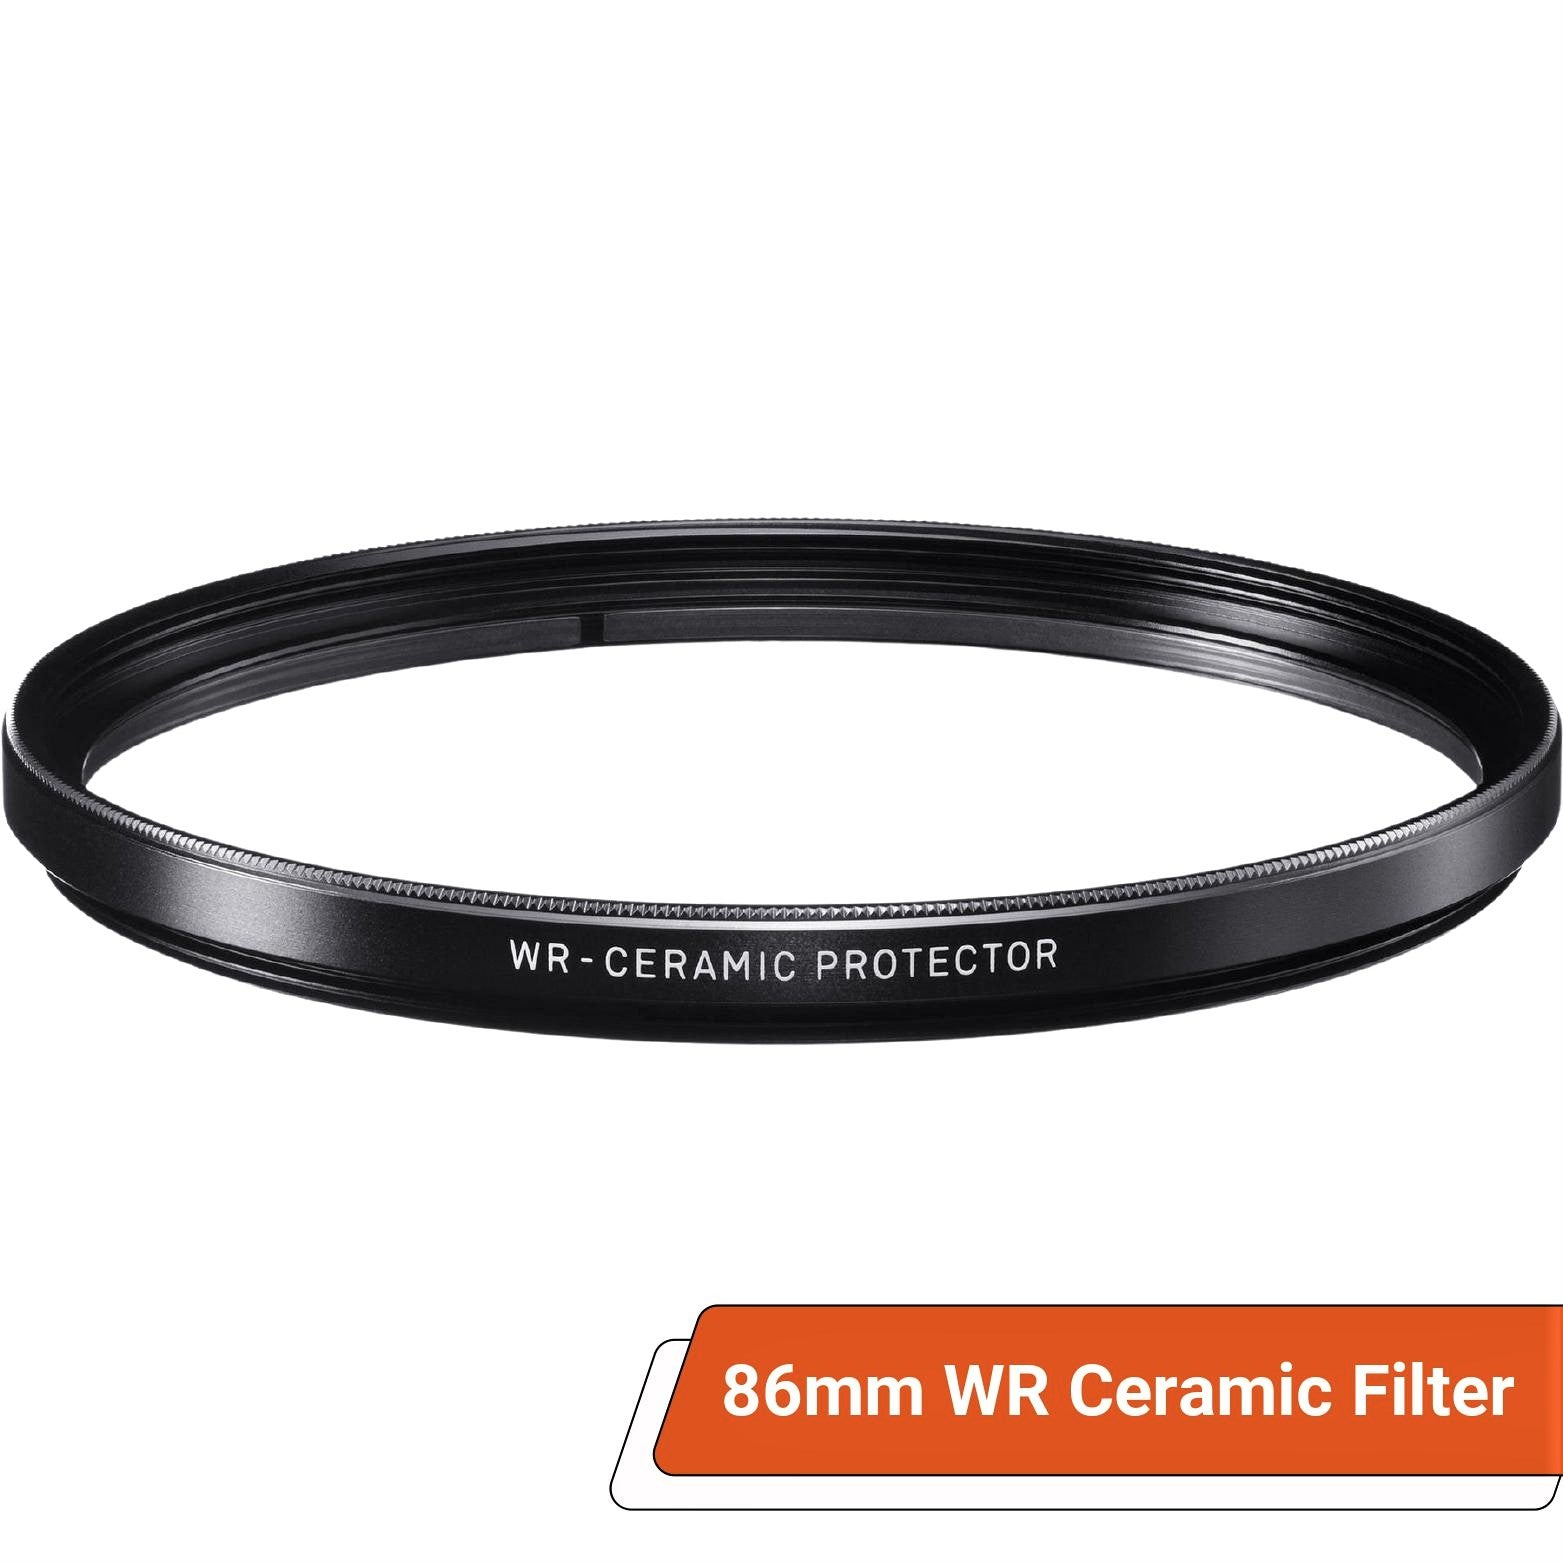 Sigma 86mm WR (Water Repellent) Ceramic Protector Filter